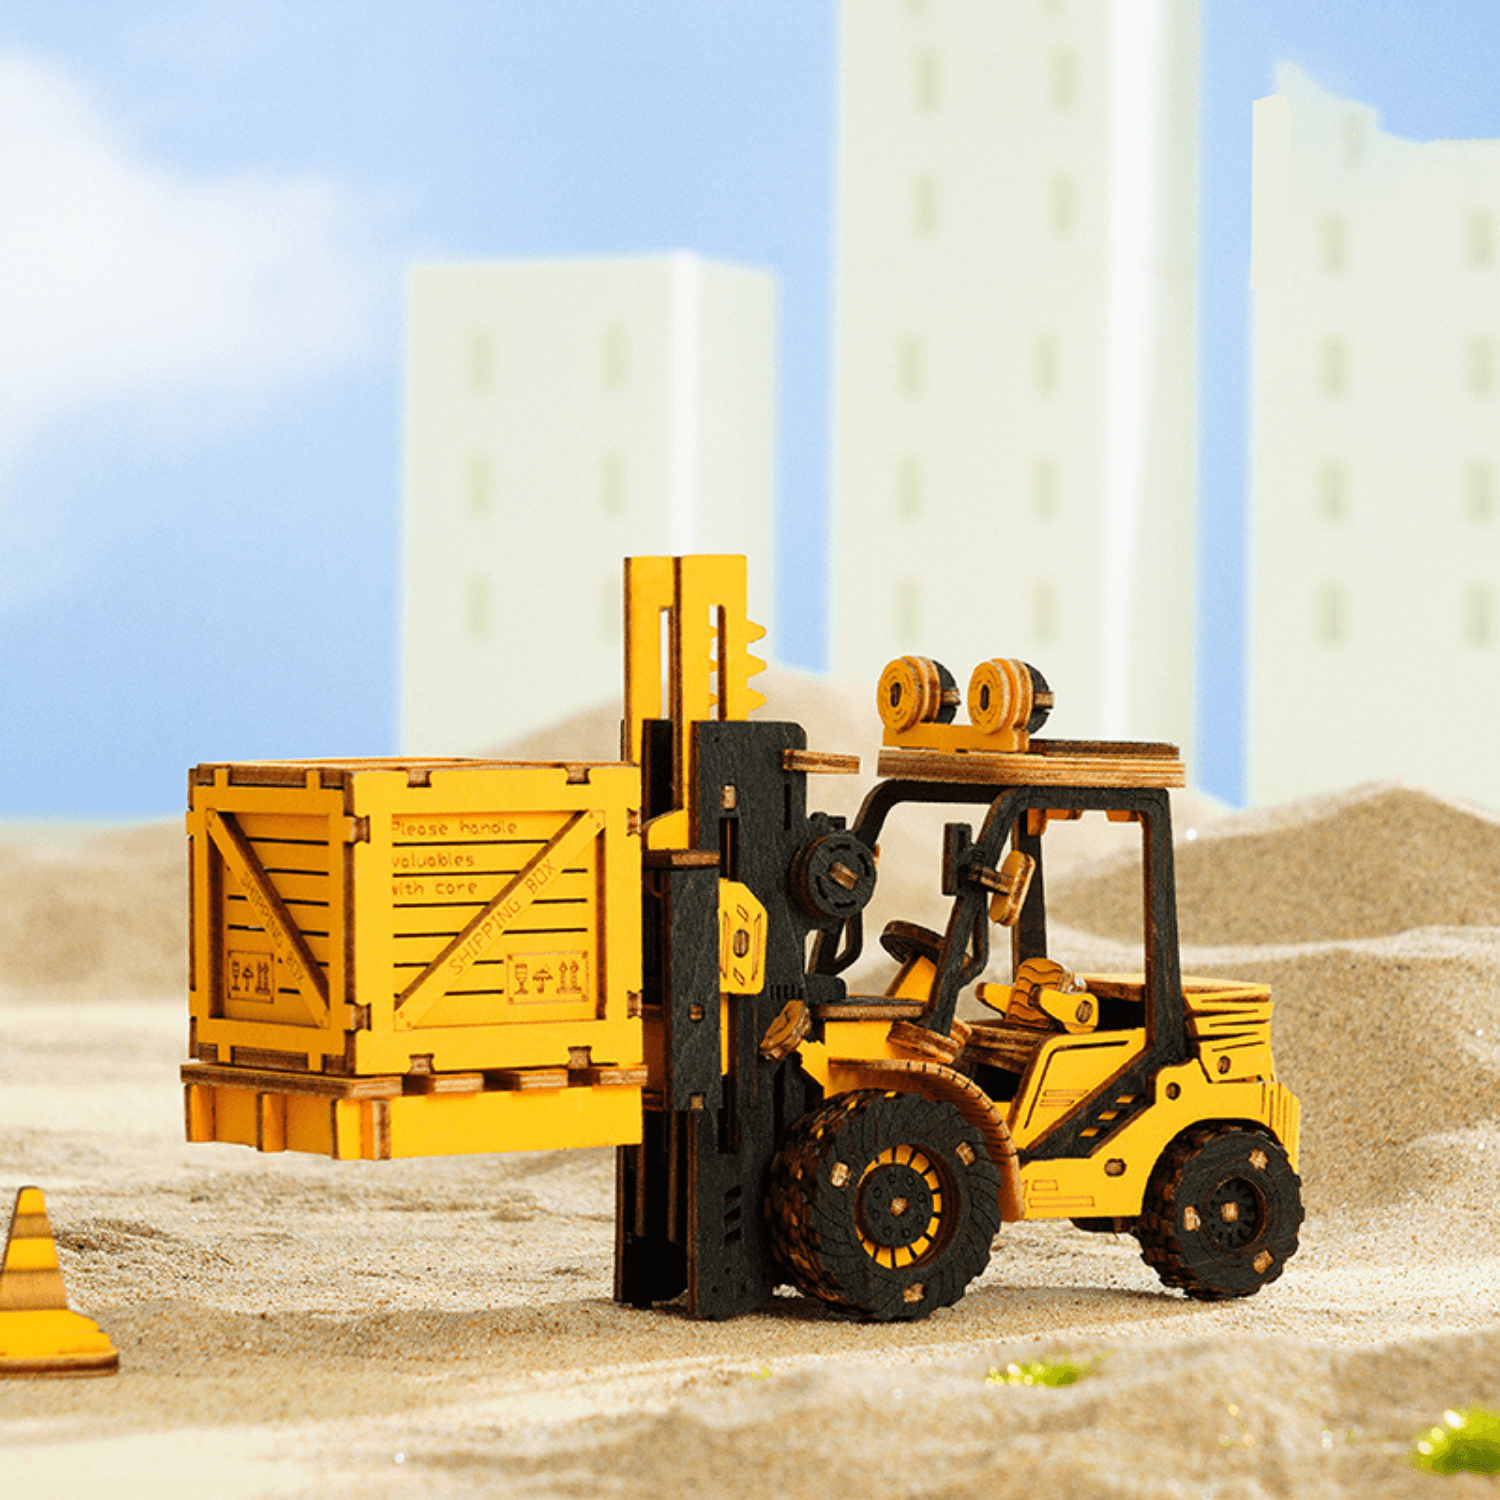 Forklift truck | Construction machinery